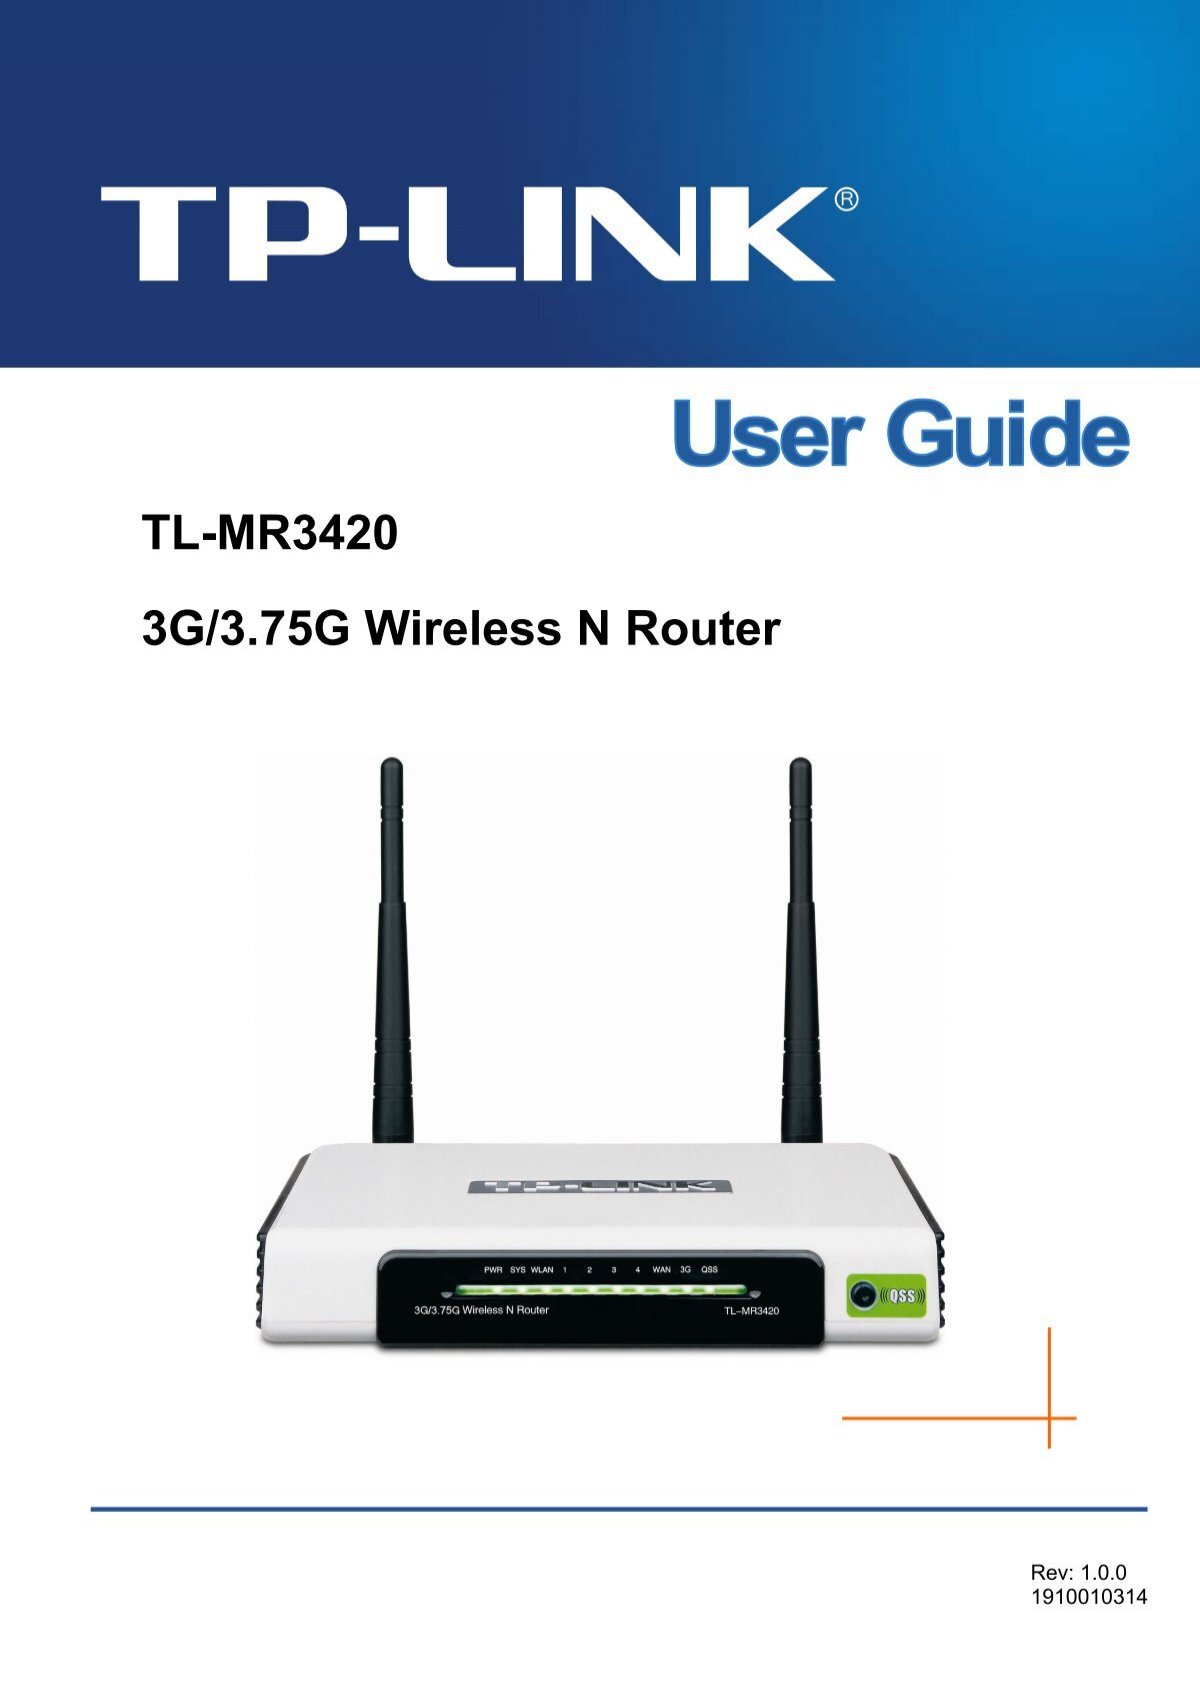 TL-MR3420 3G/3.75G Wireless N Router - TP-Link